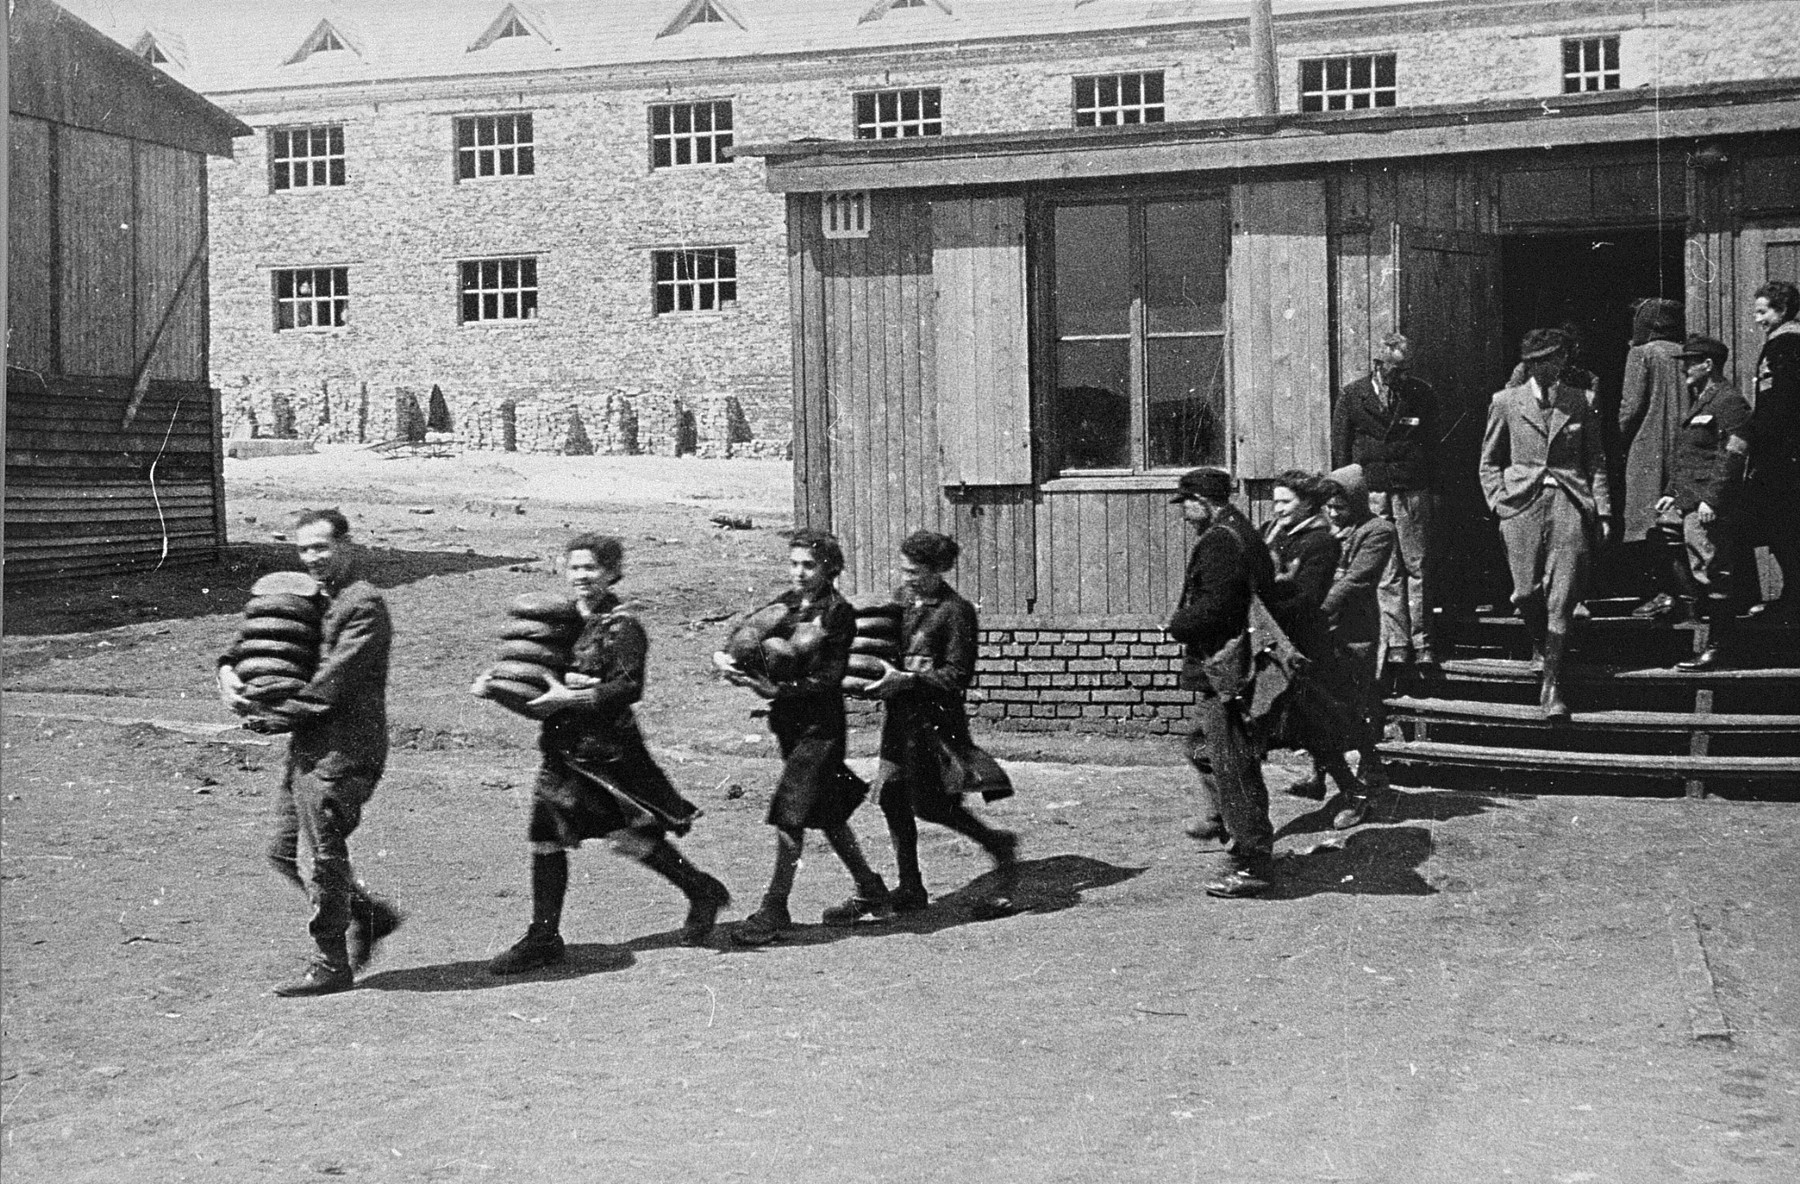 Jewish prisoners carry loaves of bread from a storehouse to the Madritch factory.  

The Madritch factory utilized concentration camp labor to produce uniforms for the German army.  The man to the right with the armband is likely a civilian supervisor.